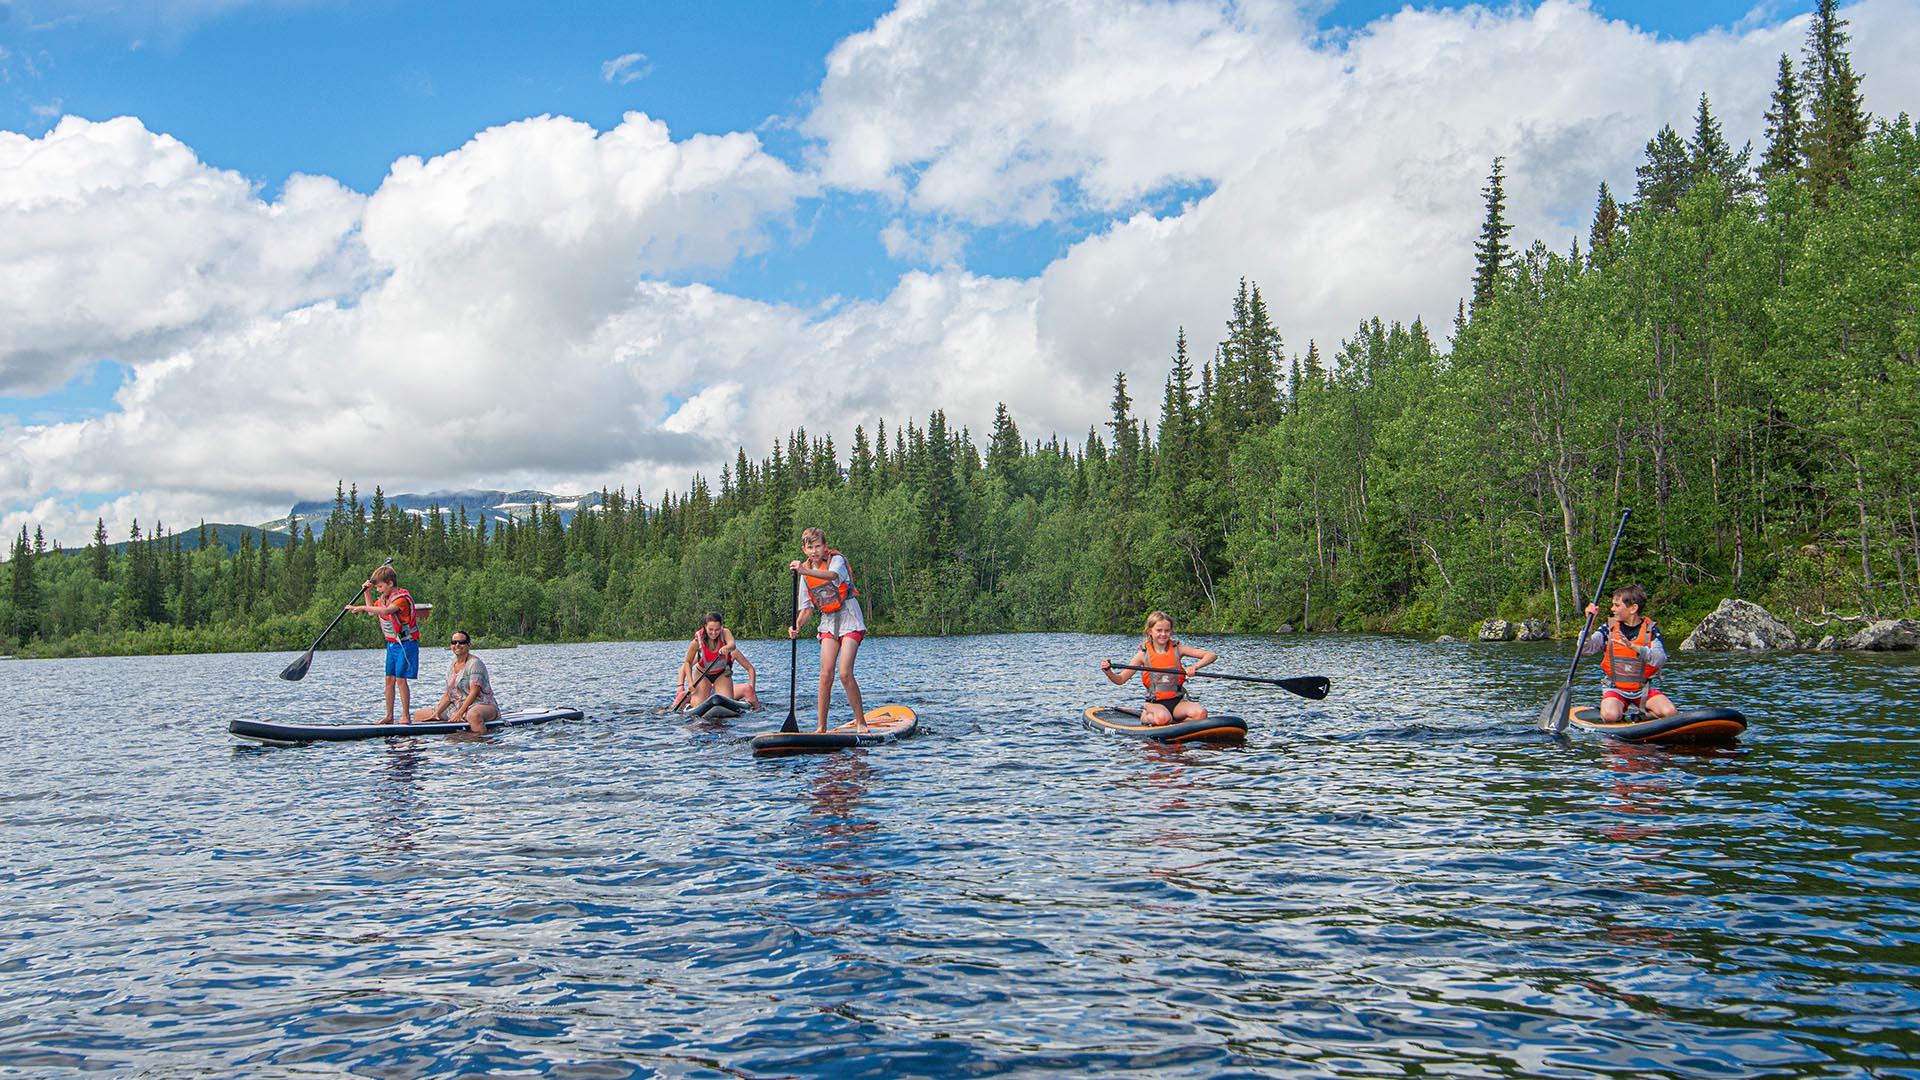 Five paddlers on each their SUP board on a lake with forest and mountains in the far horizon.